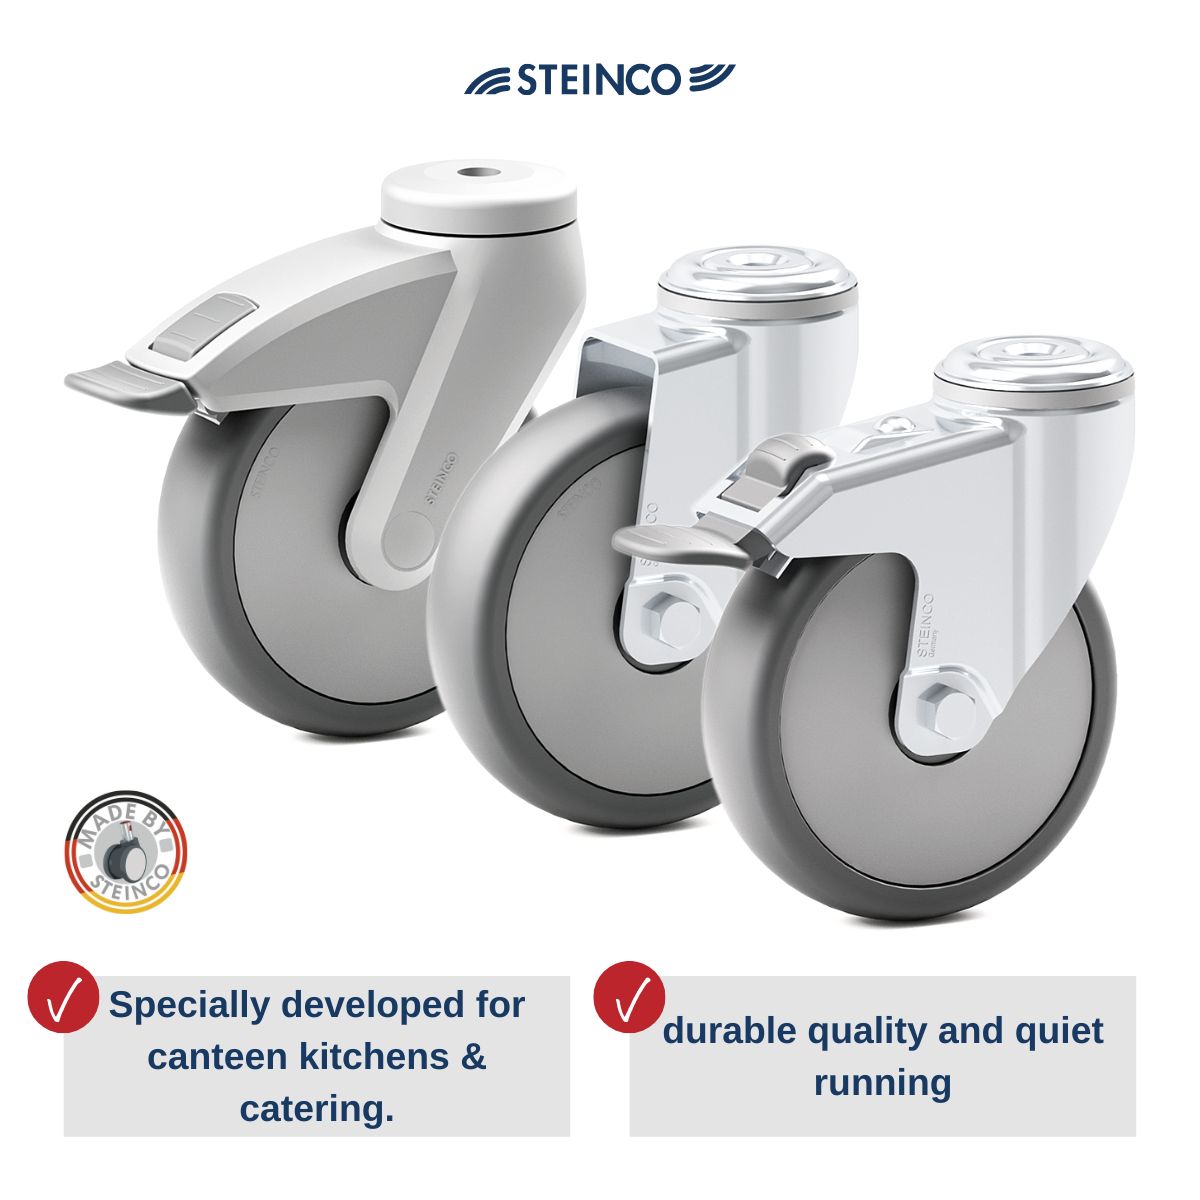 Castors for catering furniture & catering trolleys - Stainless steel and plastic wheels for kitchen furniture and kitchen trolleys.